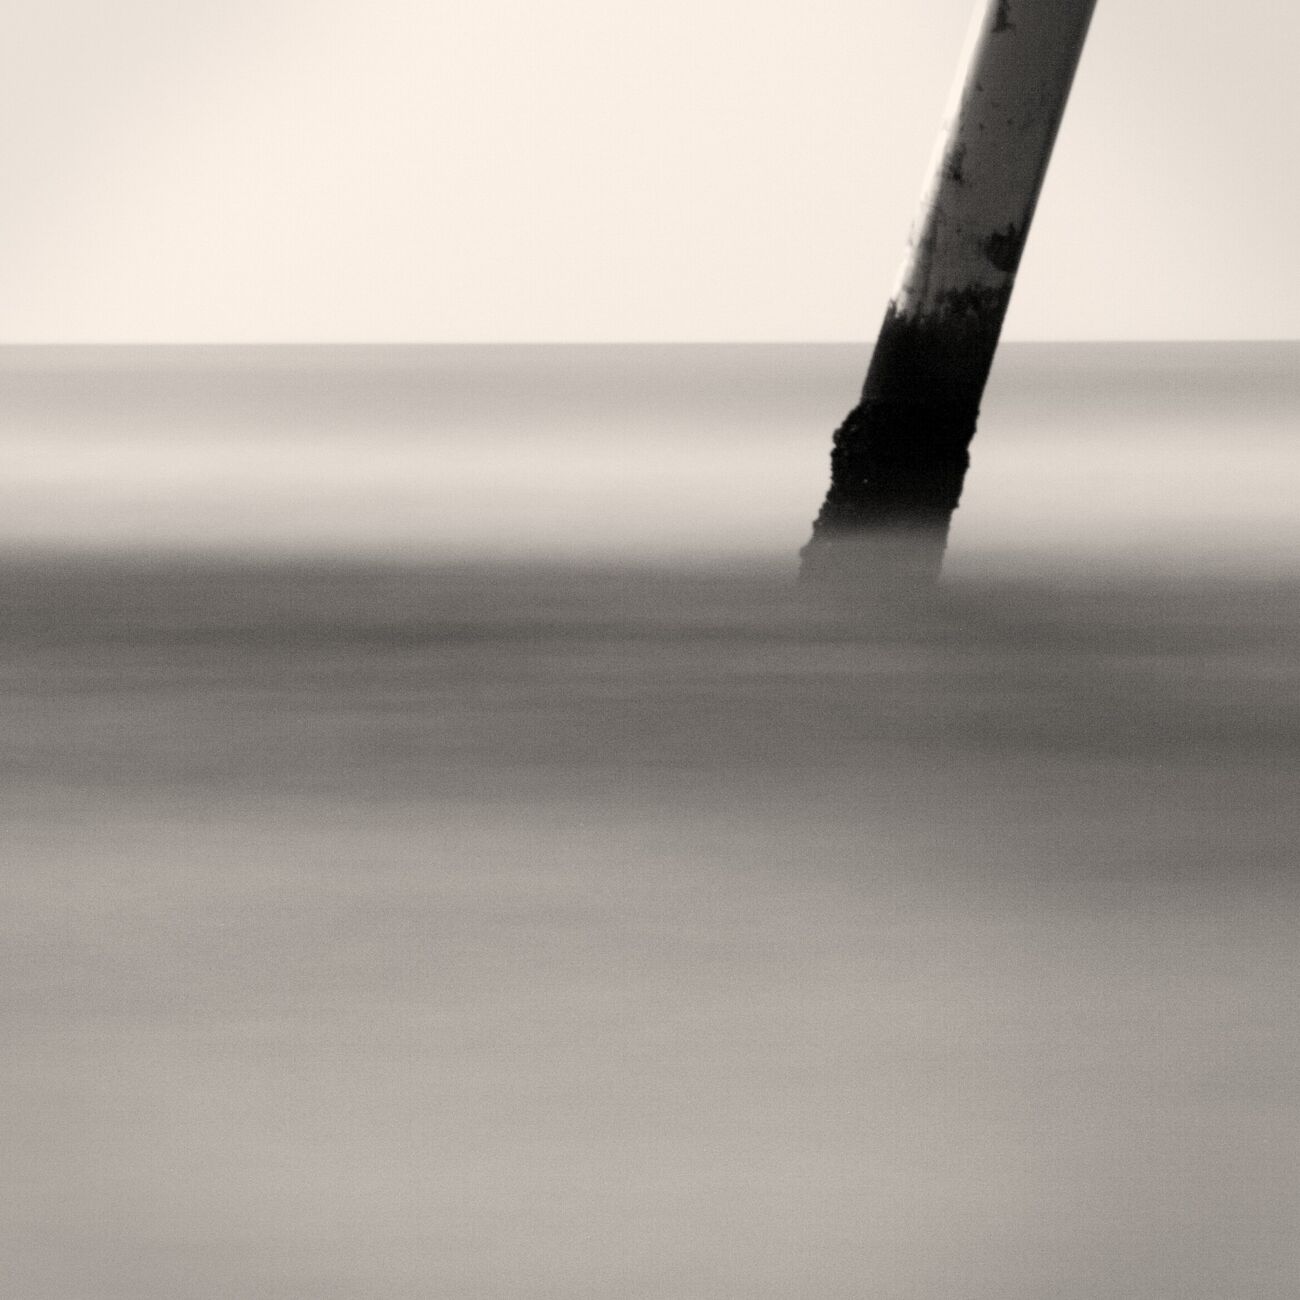 Buy a 5.1 x 5.1 in, The dividing line IV. Ref-706-18 - Denis Olivier Art Photography